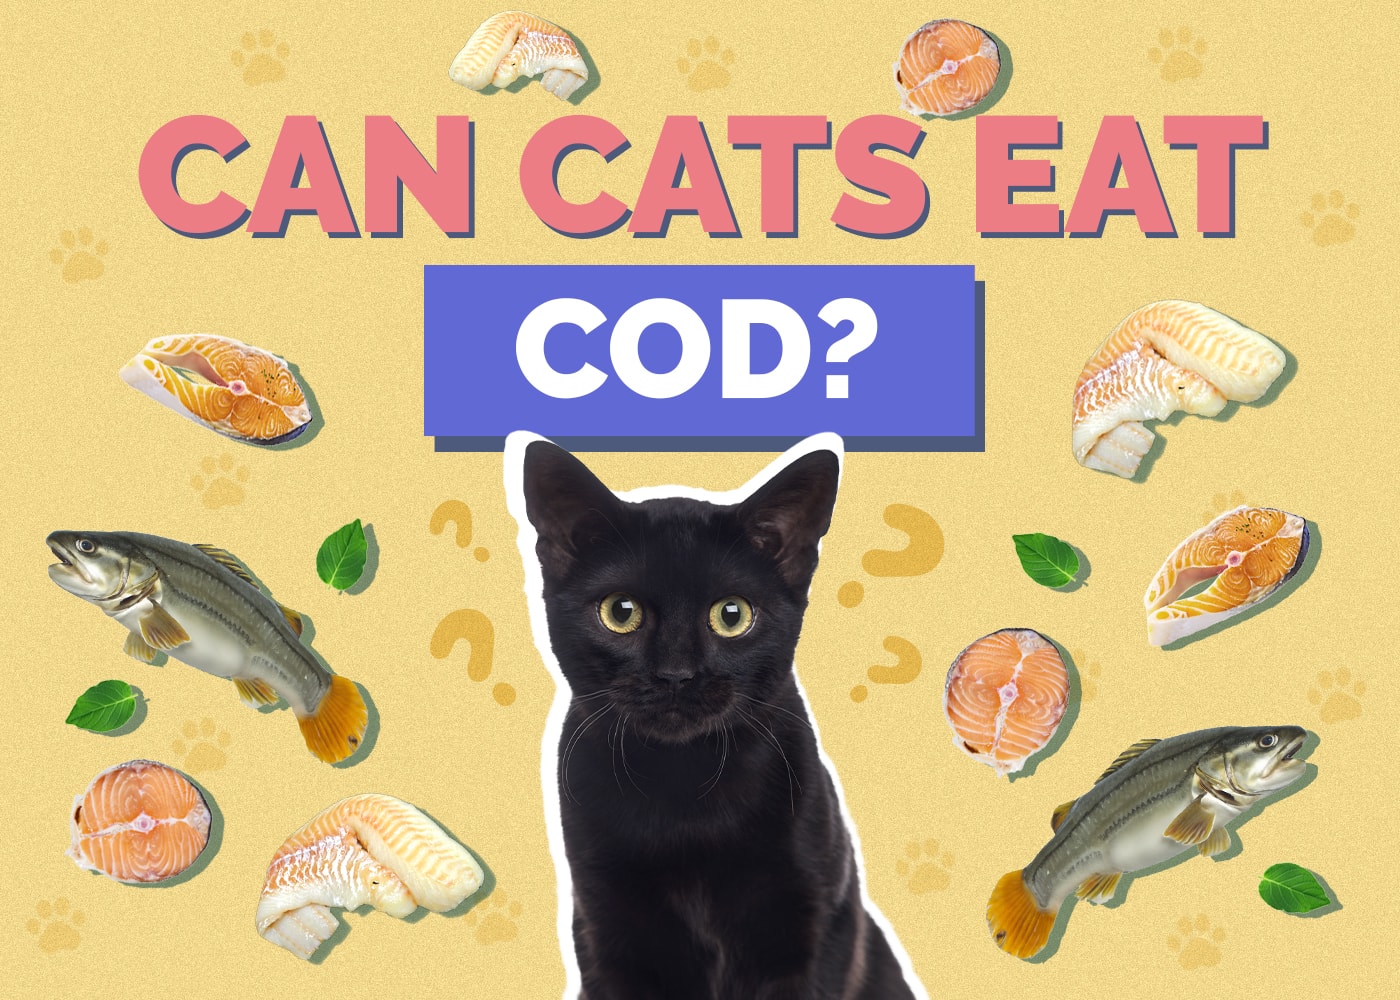 Can Cats Eat cod